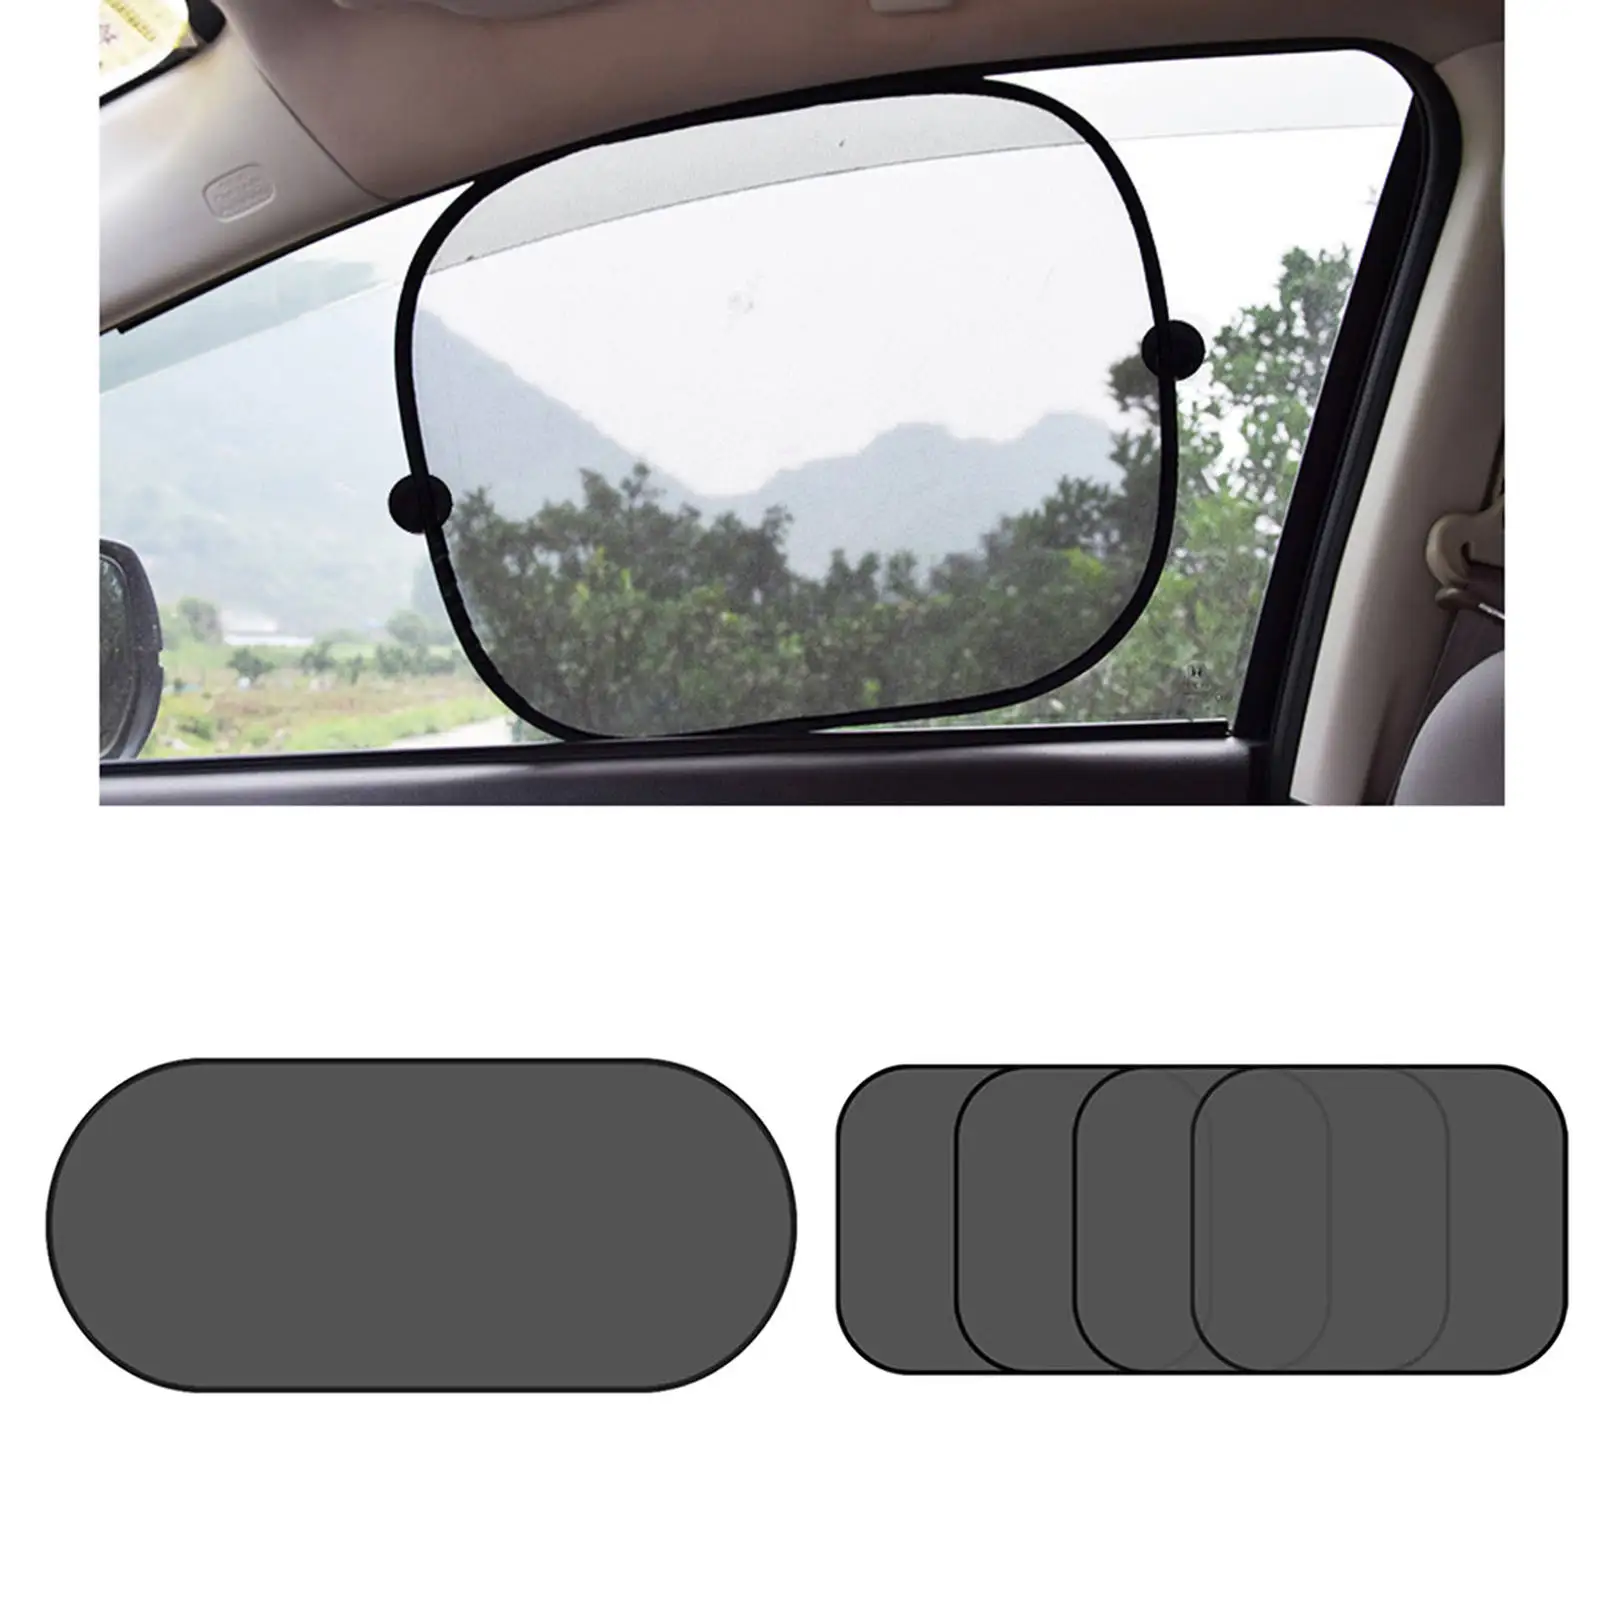 Car Sunshade Cover Protect Kids Pets Interior Accessories Back Seat Windshield Sun Shade Sun Visor Protector Fits for Car Van